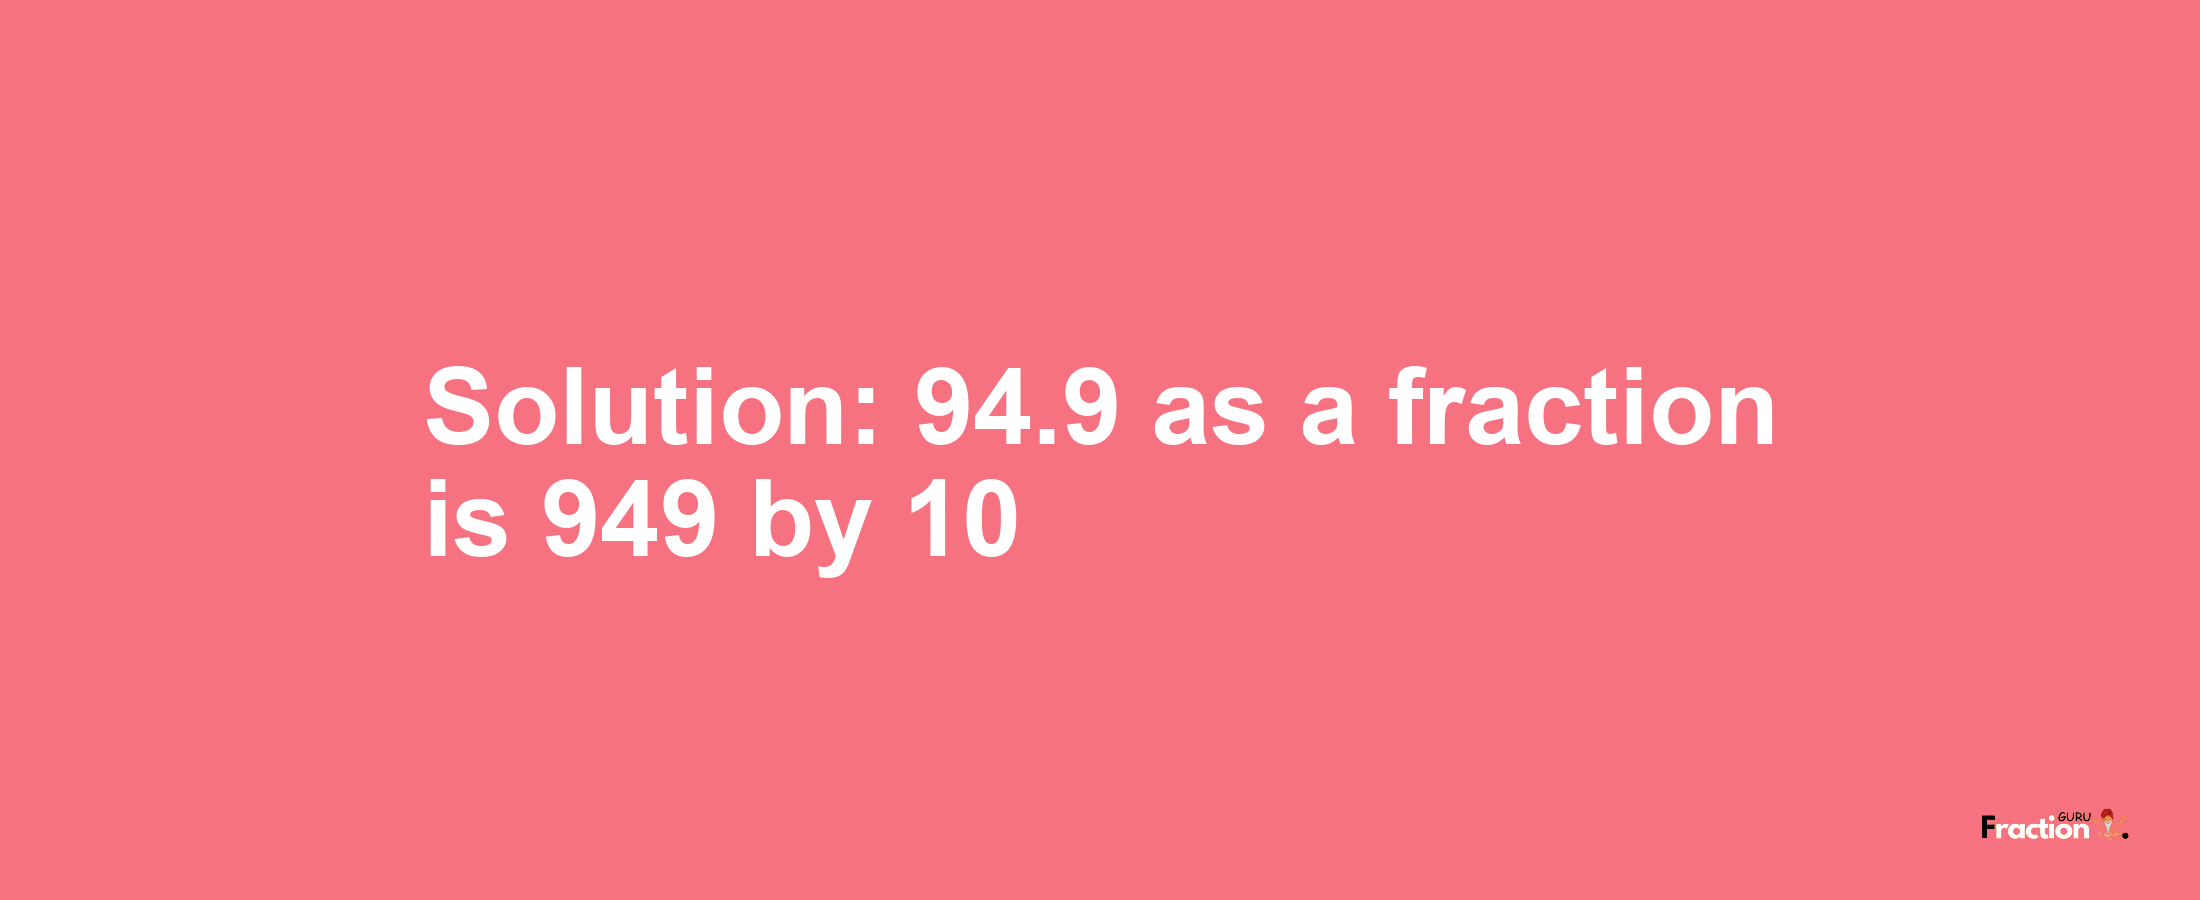 Solution:94.9 as a fraction is 949/10